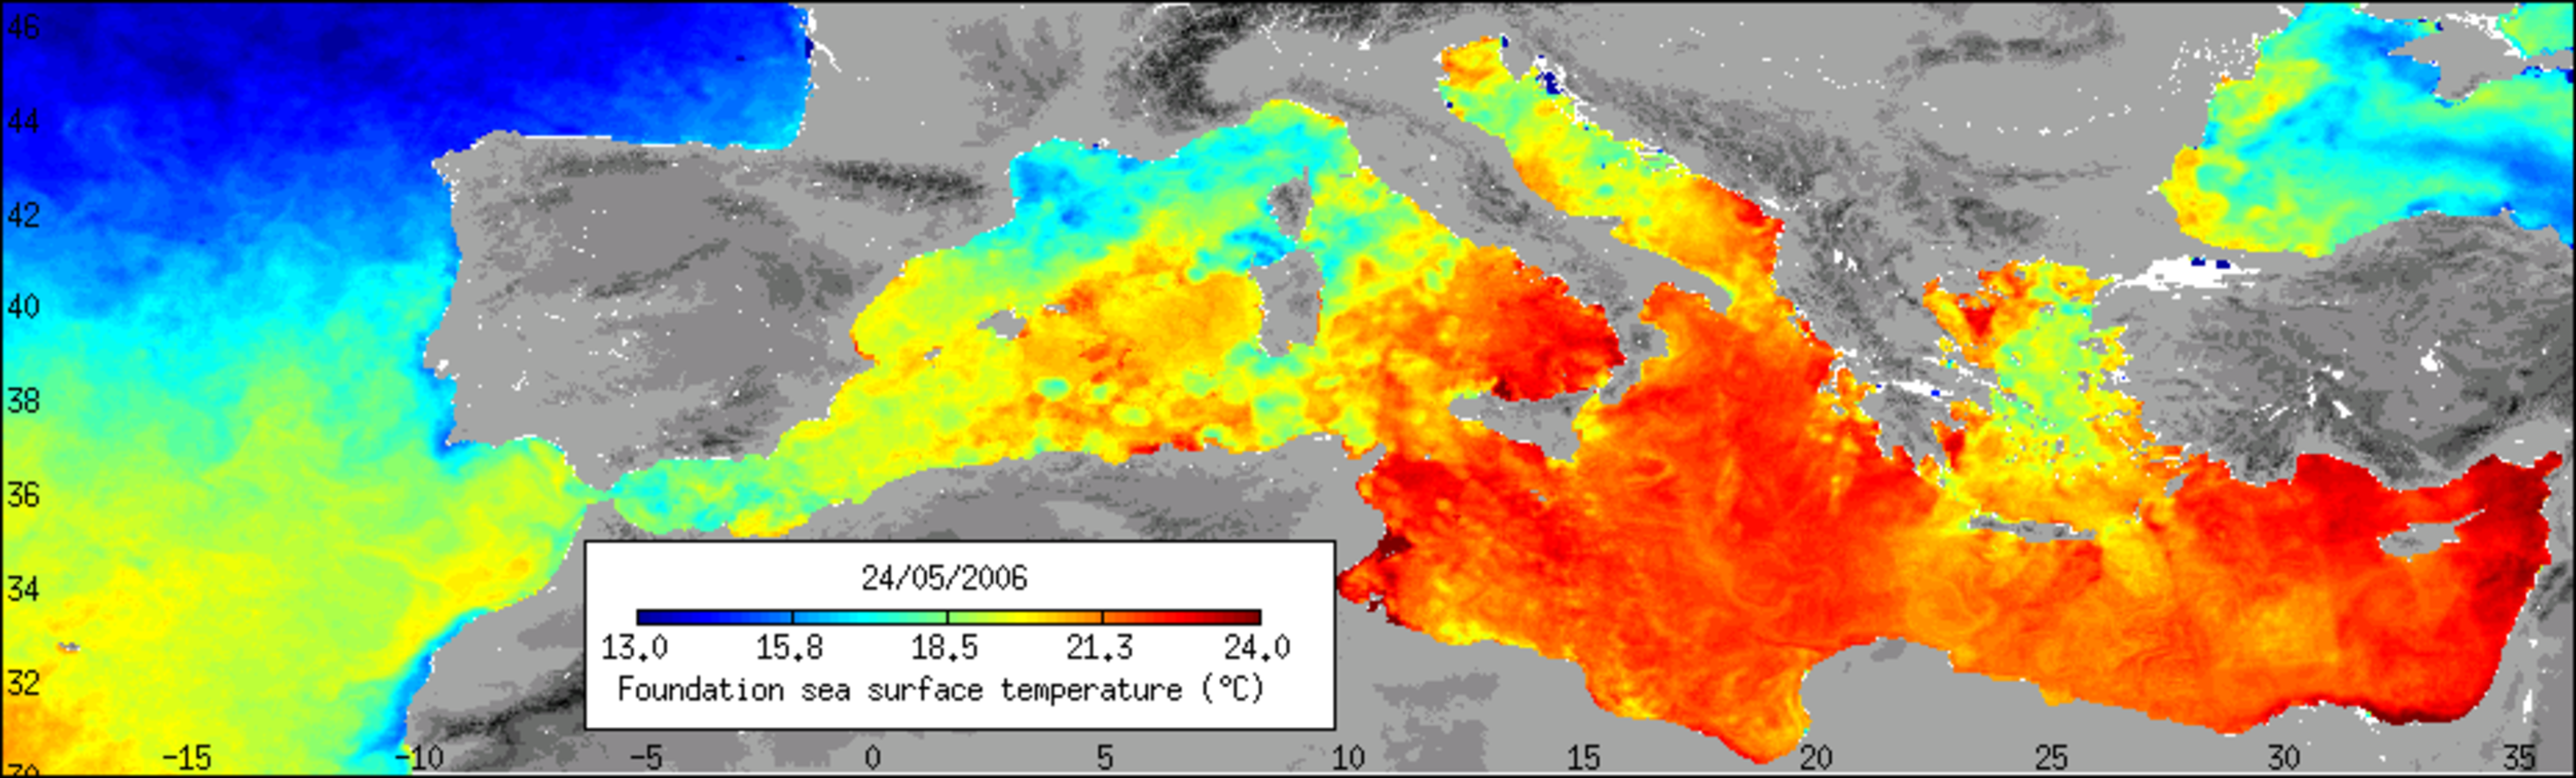 Sea surface temperature map acquired on 24 May 2006